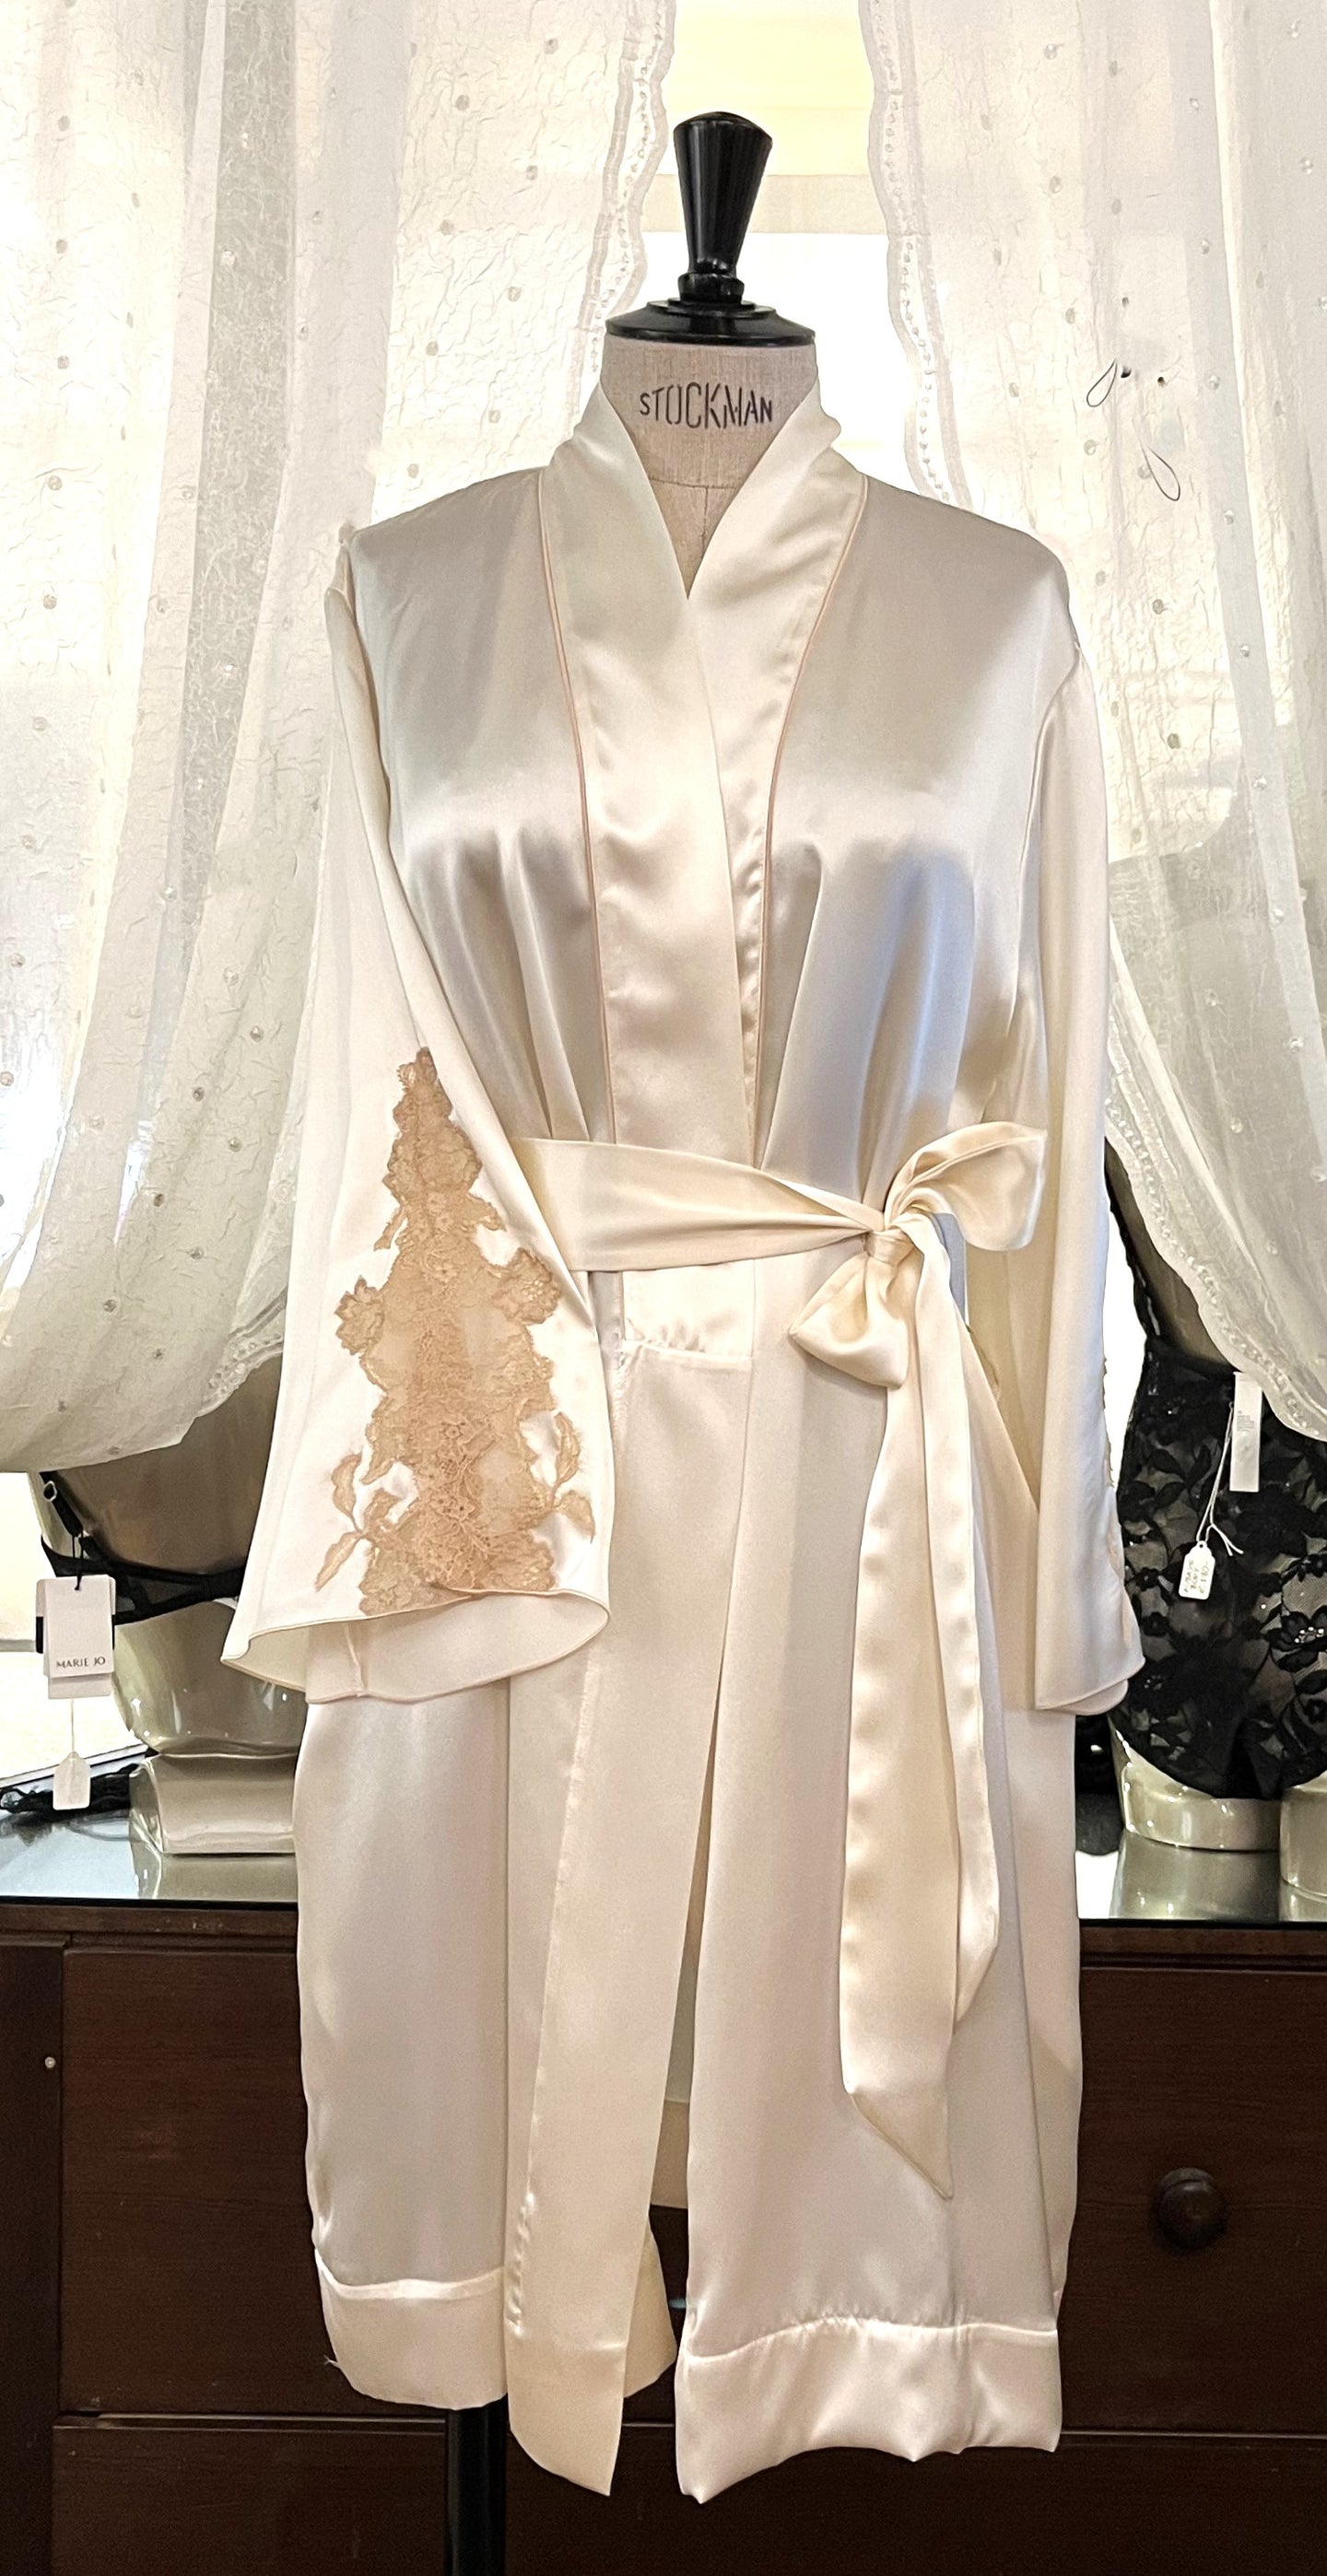 Ivory/Ecru. Beautiful Pure Silk Robe.  Generous Belted at the waist contrasting lace on the sleeve and matching black piping on the Kimono style collar. Two concealed side pockets. Wonderful to wear over any item or nightwear, or to match with our Verdiani Night/Slips.  100% Silk Satin. Lace: 78% Nylon, 16% Elastane, 6% Polyester. Made in Italy. Machine washable. Loose fitting for comfort and movement. 